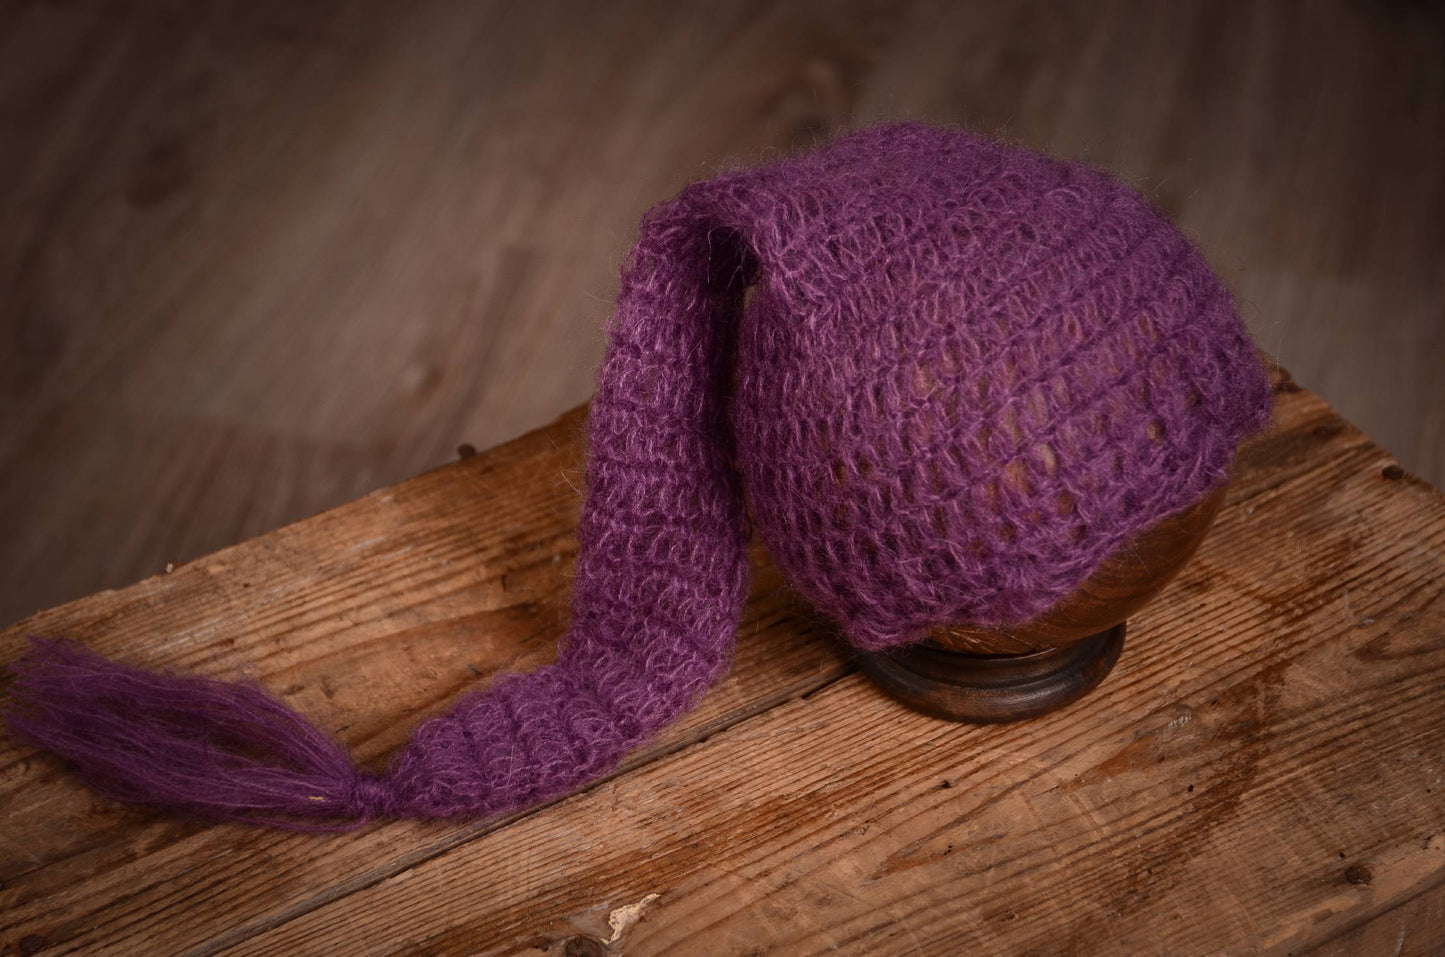 Ornate Mohair Sleeping Hat - Violet-Newborn Photography Props